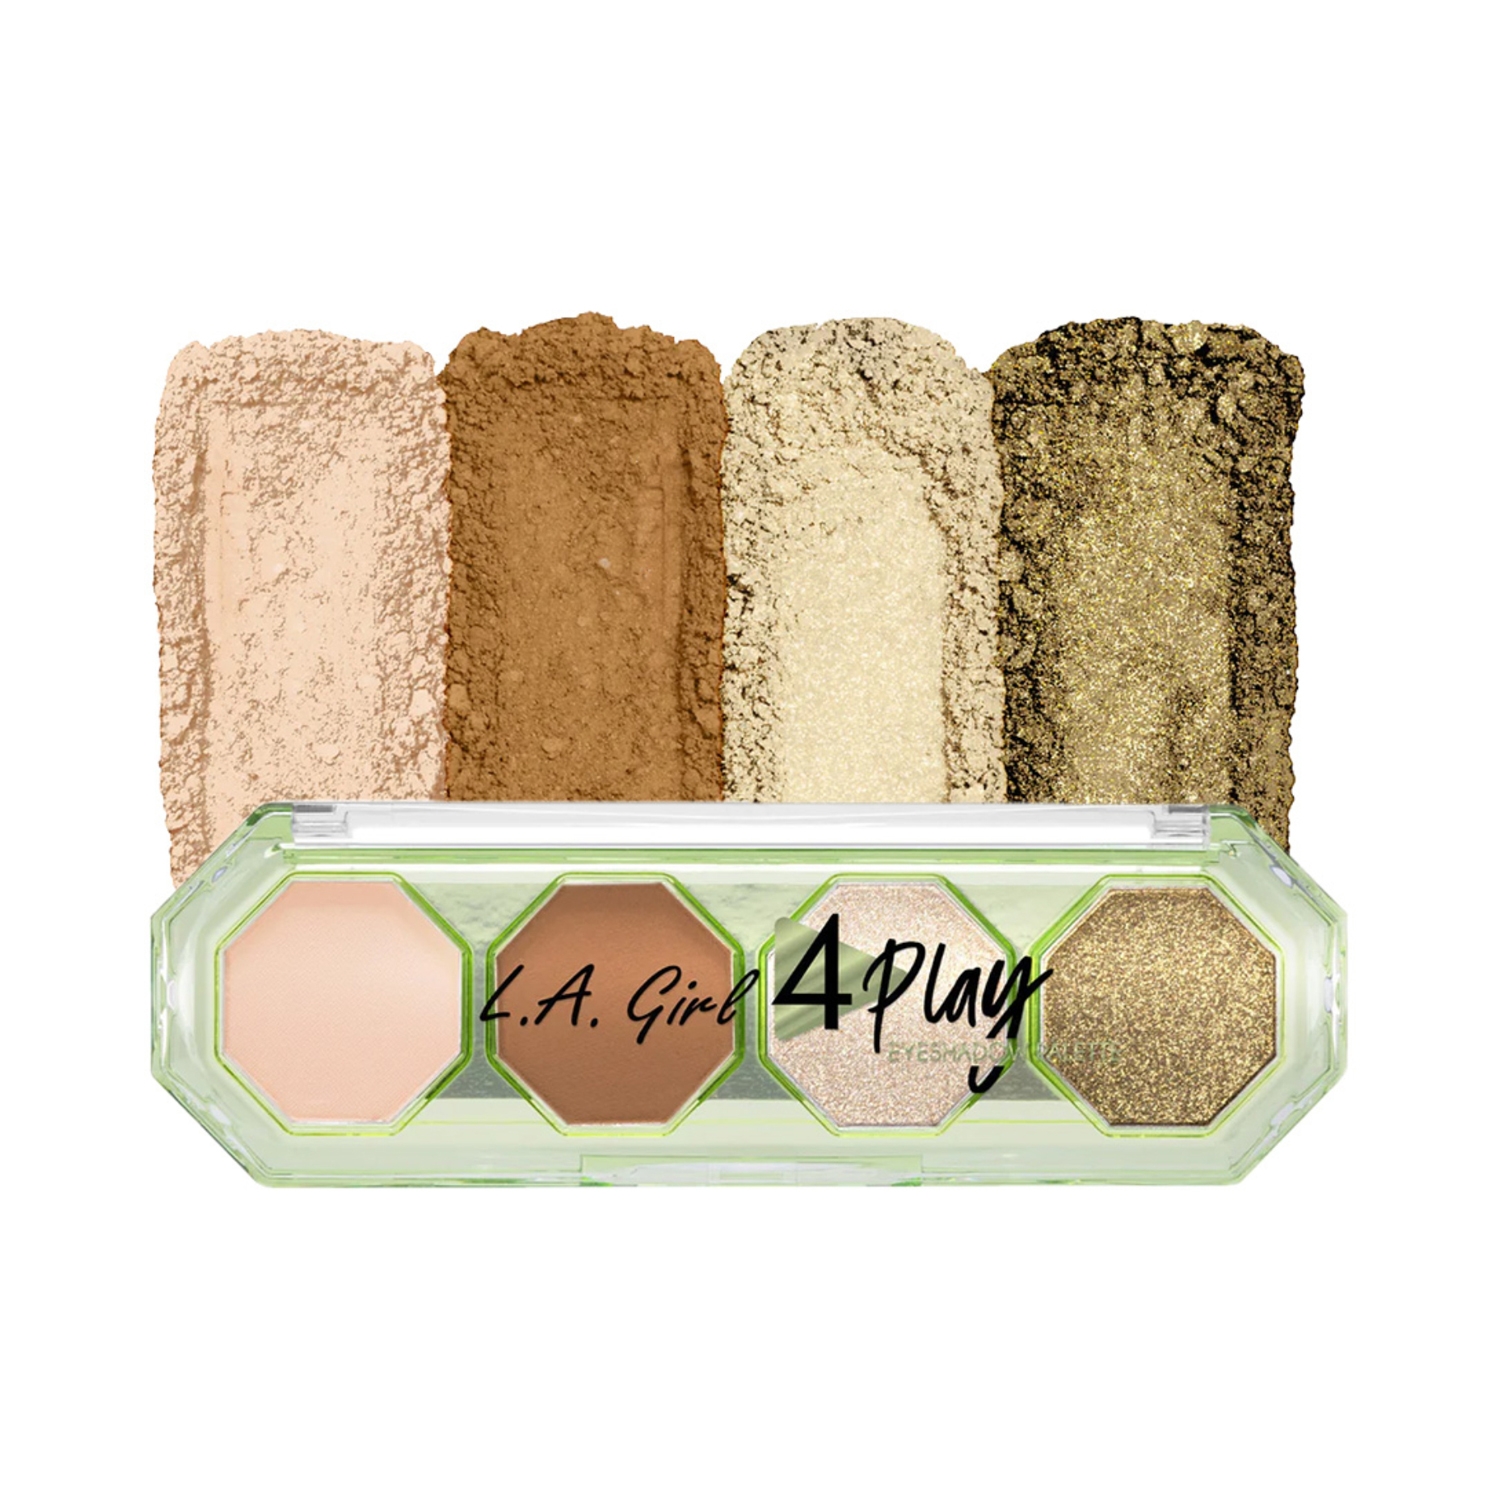 L.A. Girl | L.A. Girl 4 Play Eyeshadow Palette - GES233 Cowgirl (3.2g)